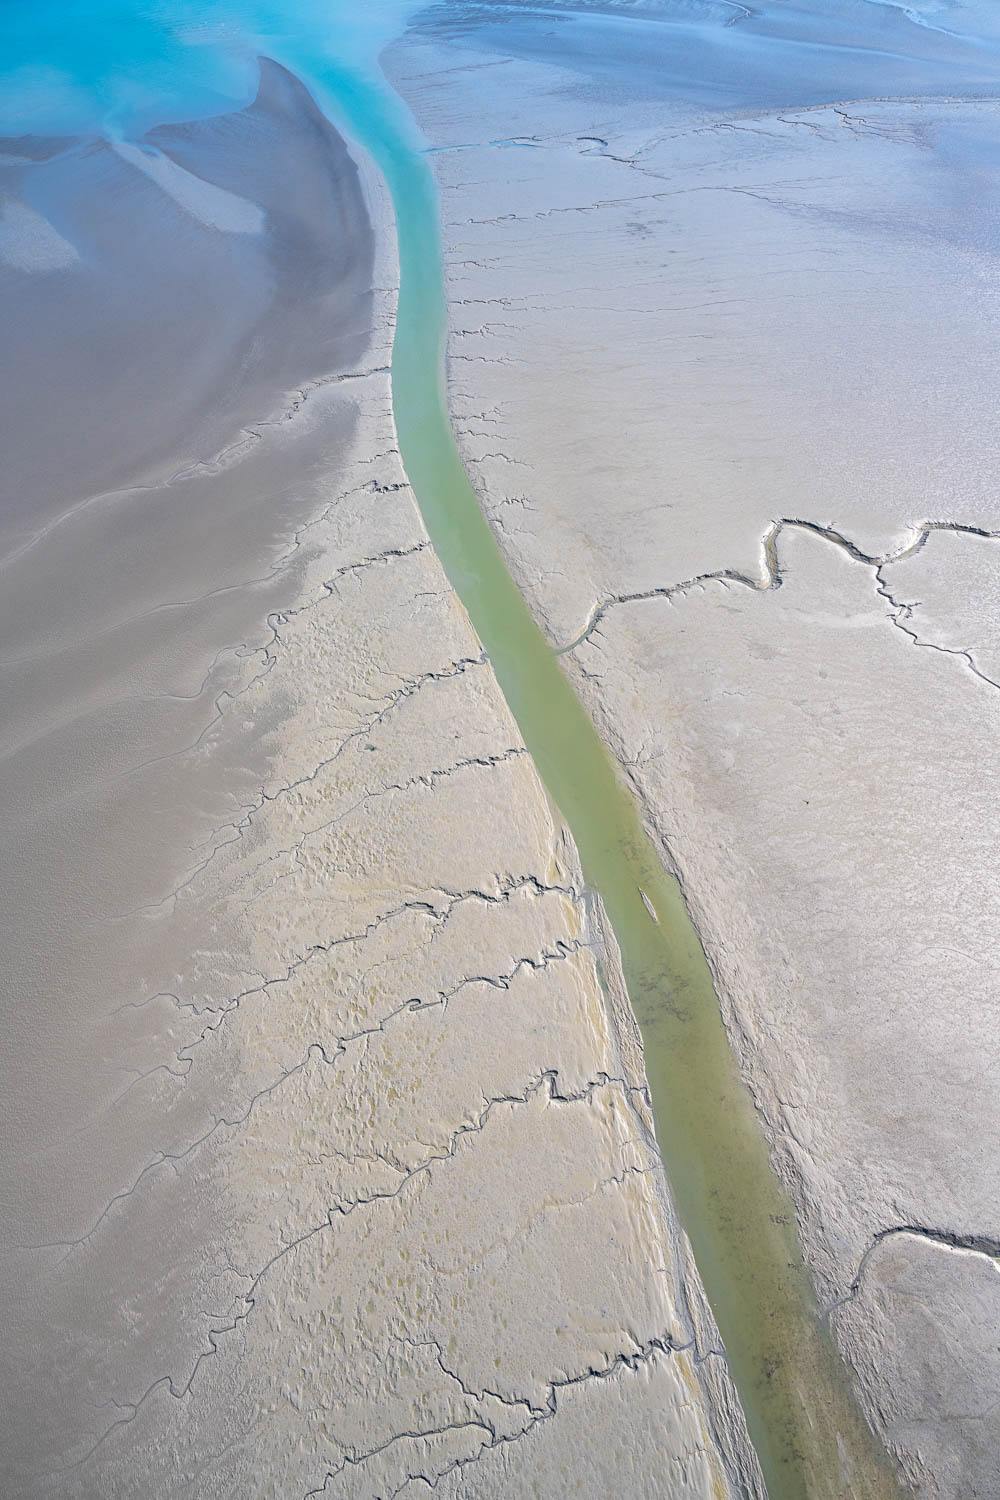 A beach-like land with a green-colored long line making a passage of water, and some cracks on the land, Broome #15 